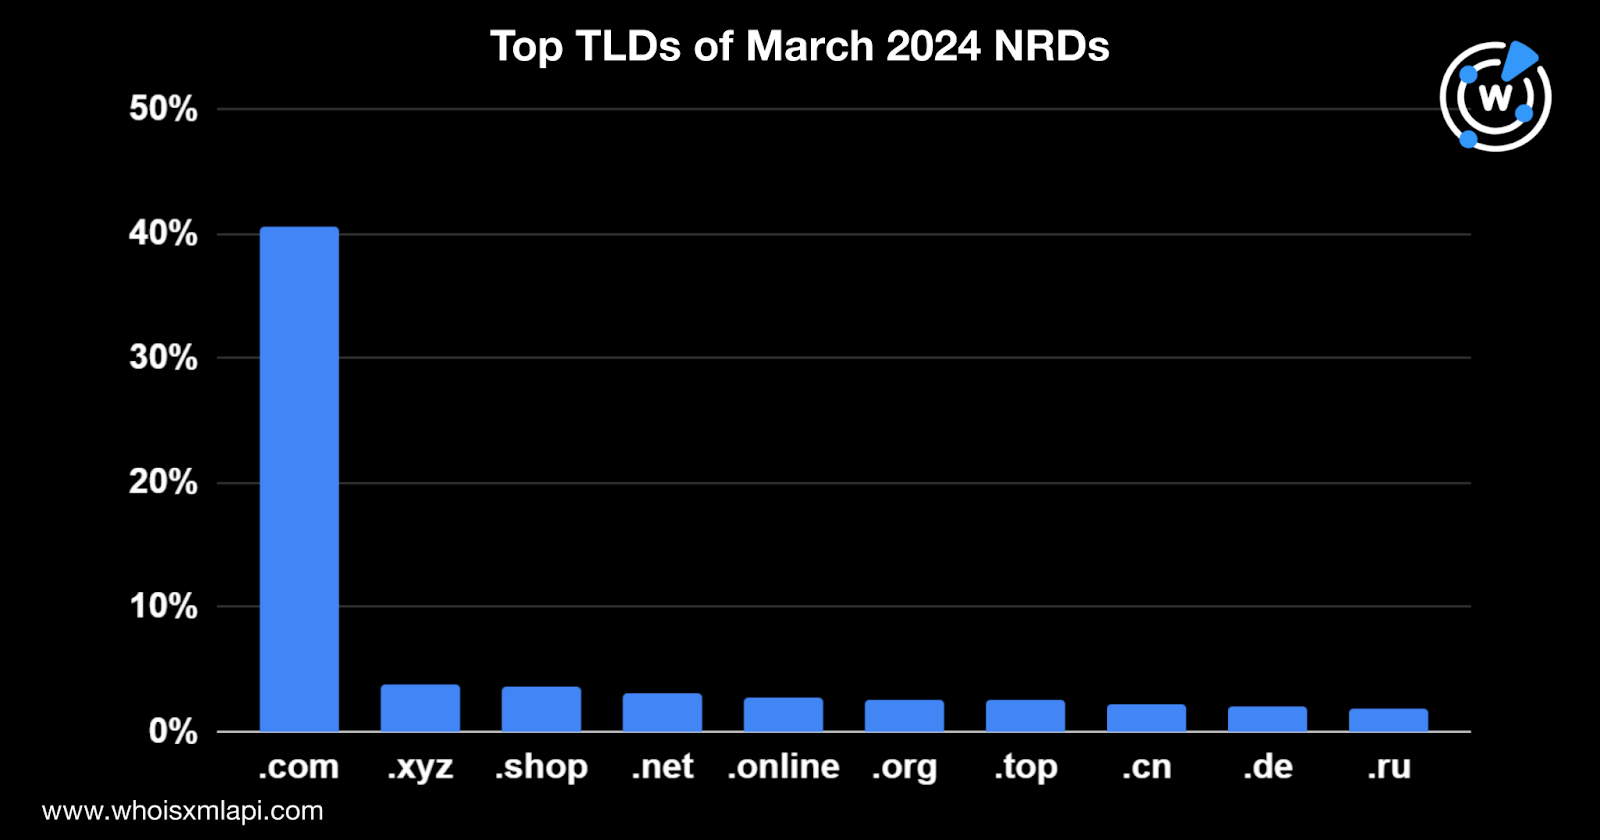 Top TLDs of March 2024 NRDs